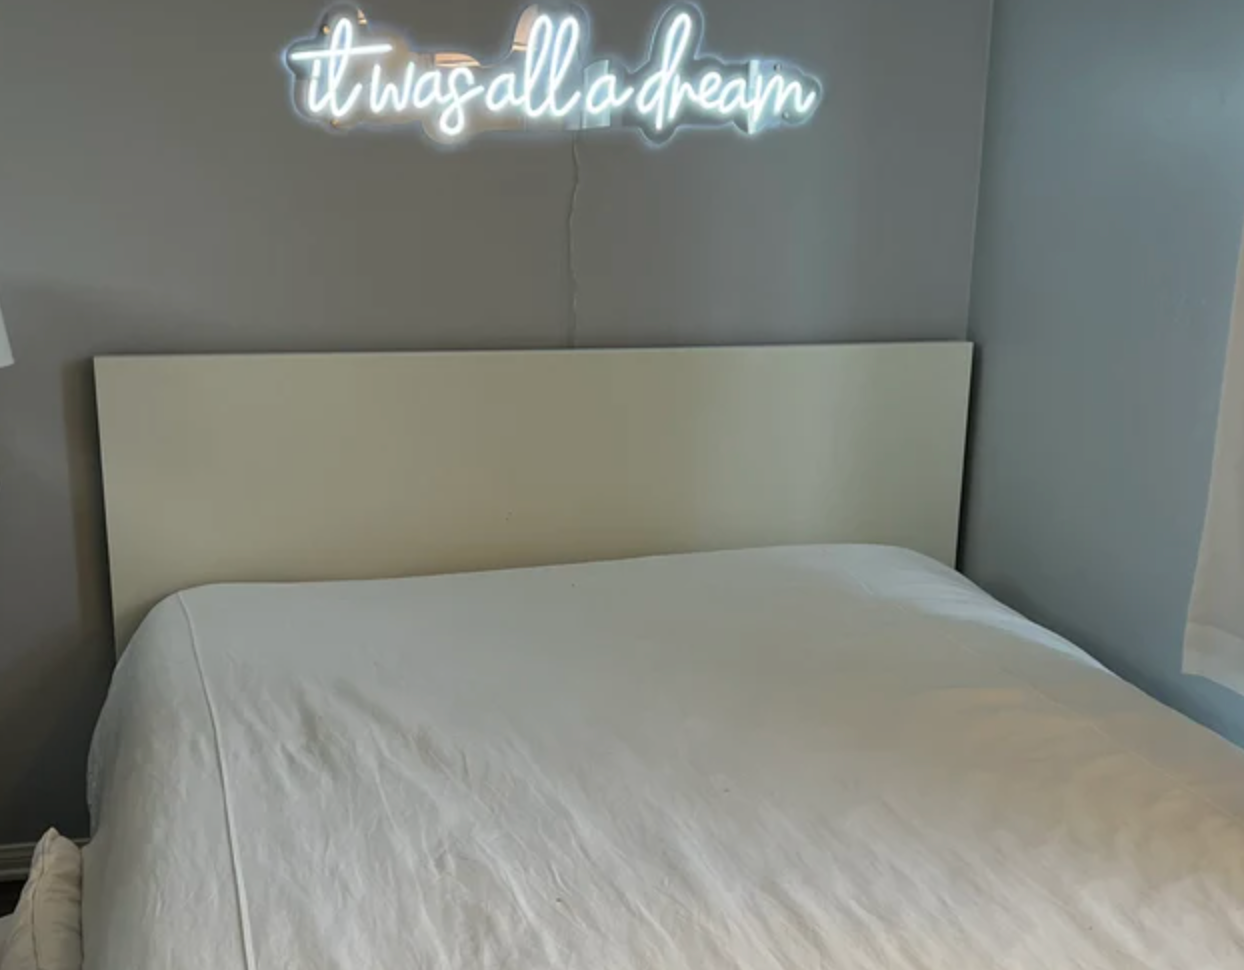 "It Was All a Dream" LED Neon Sign - 28"